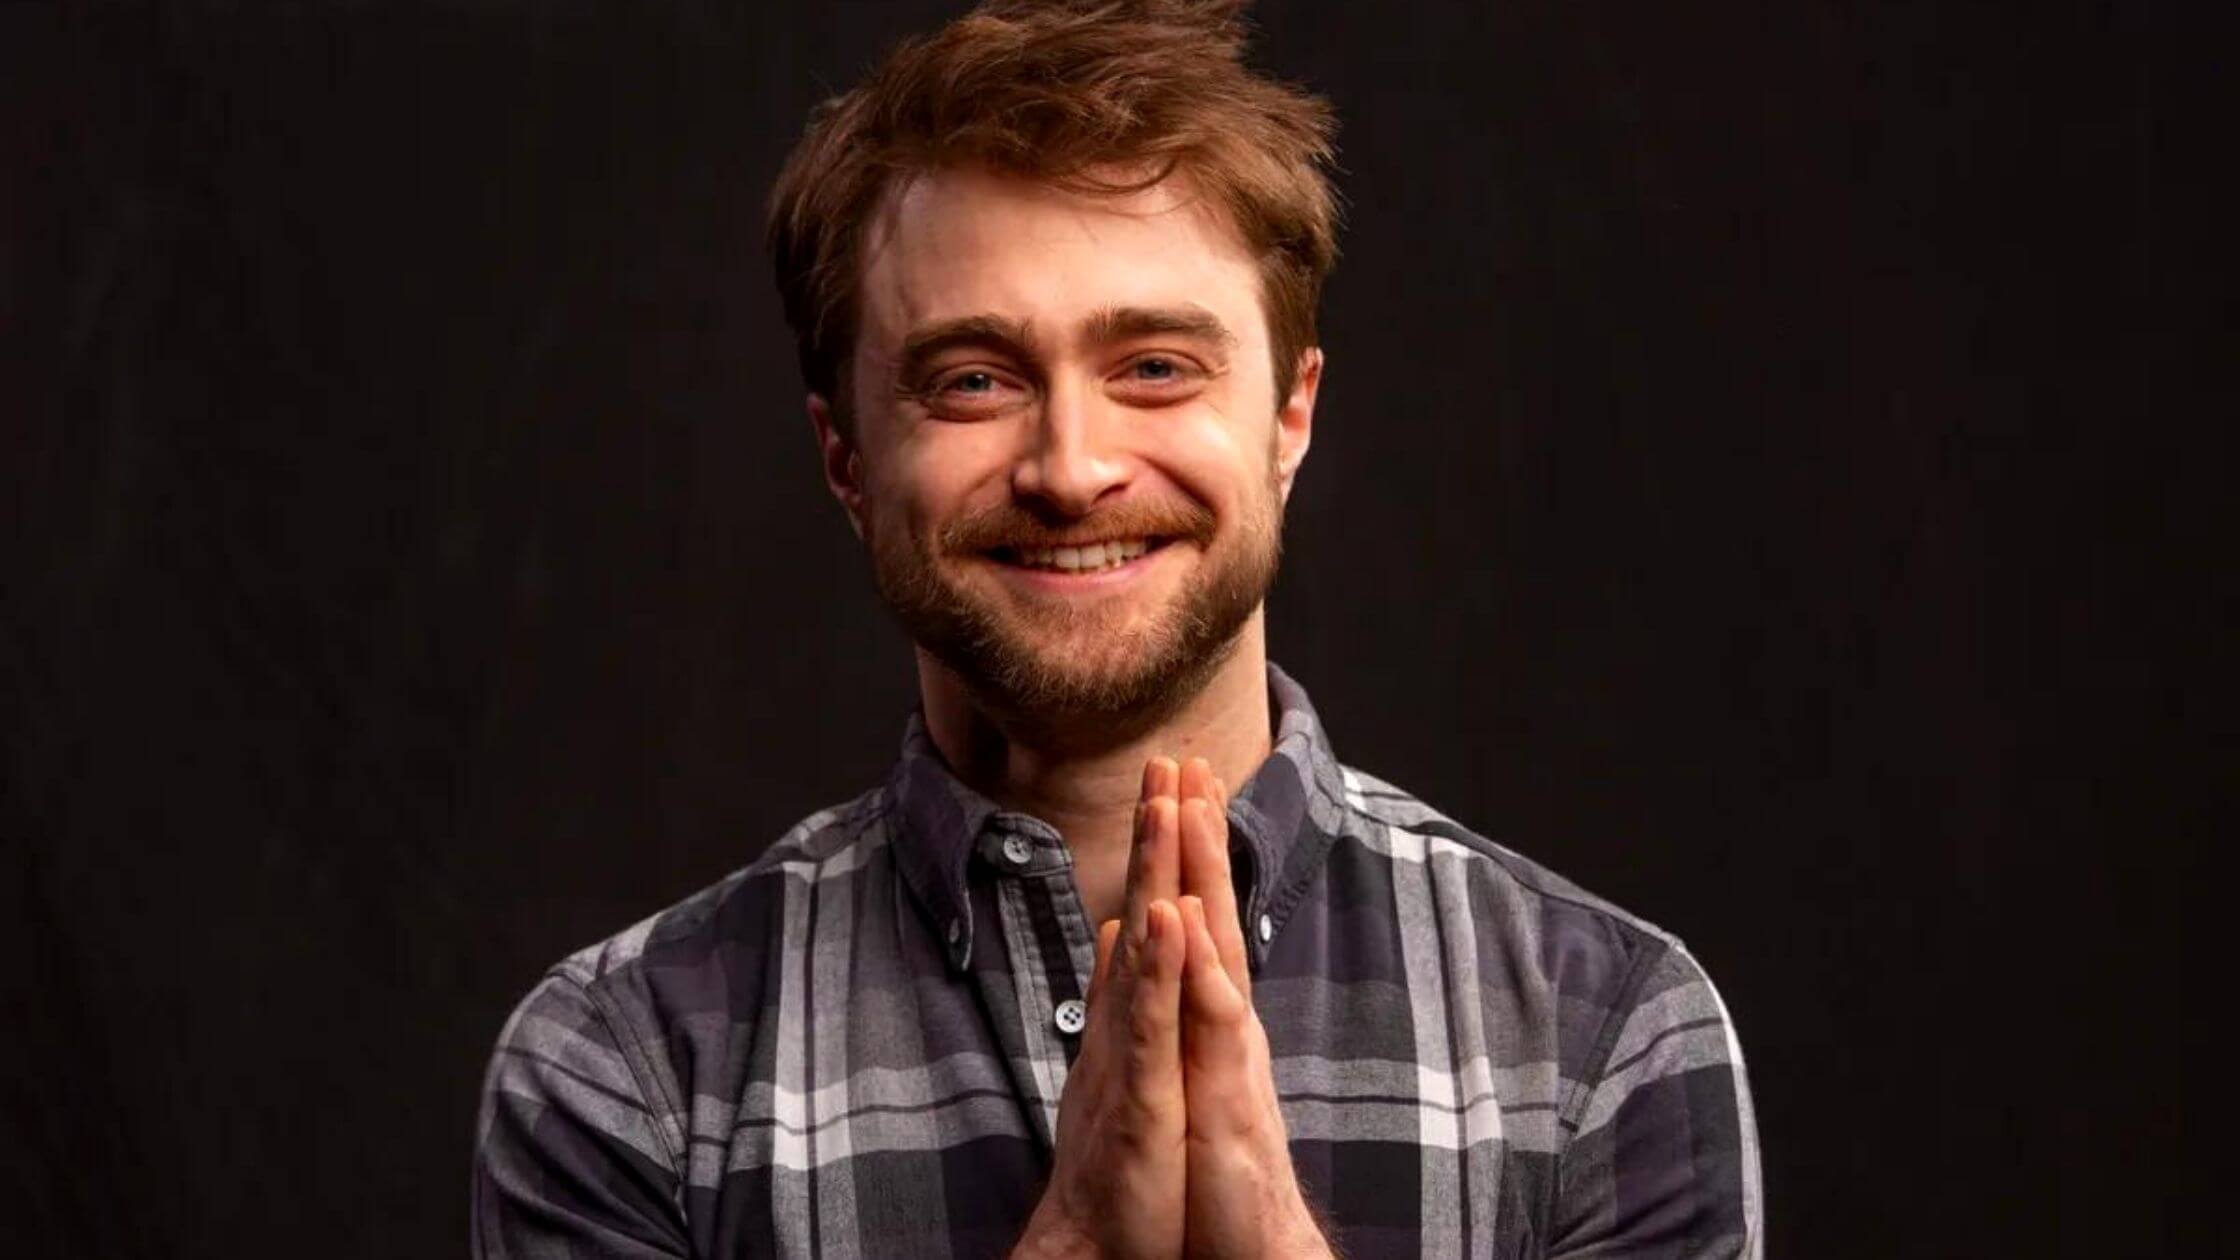 Daniel Radcliffe's Net Worth, Wife, Age, Height, And Movies